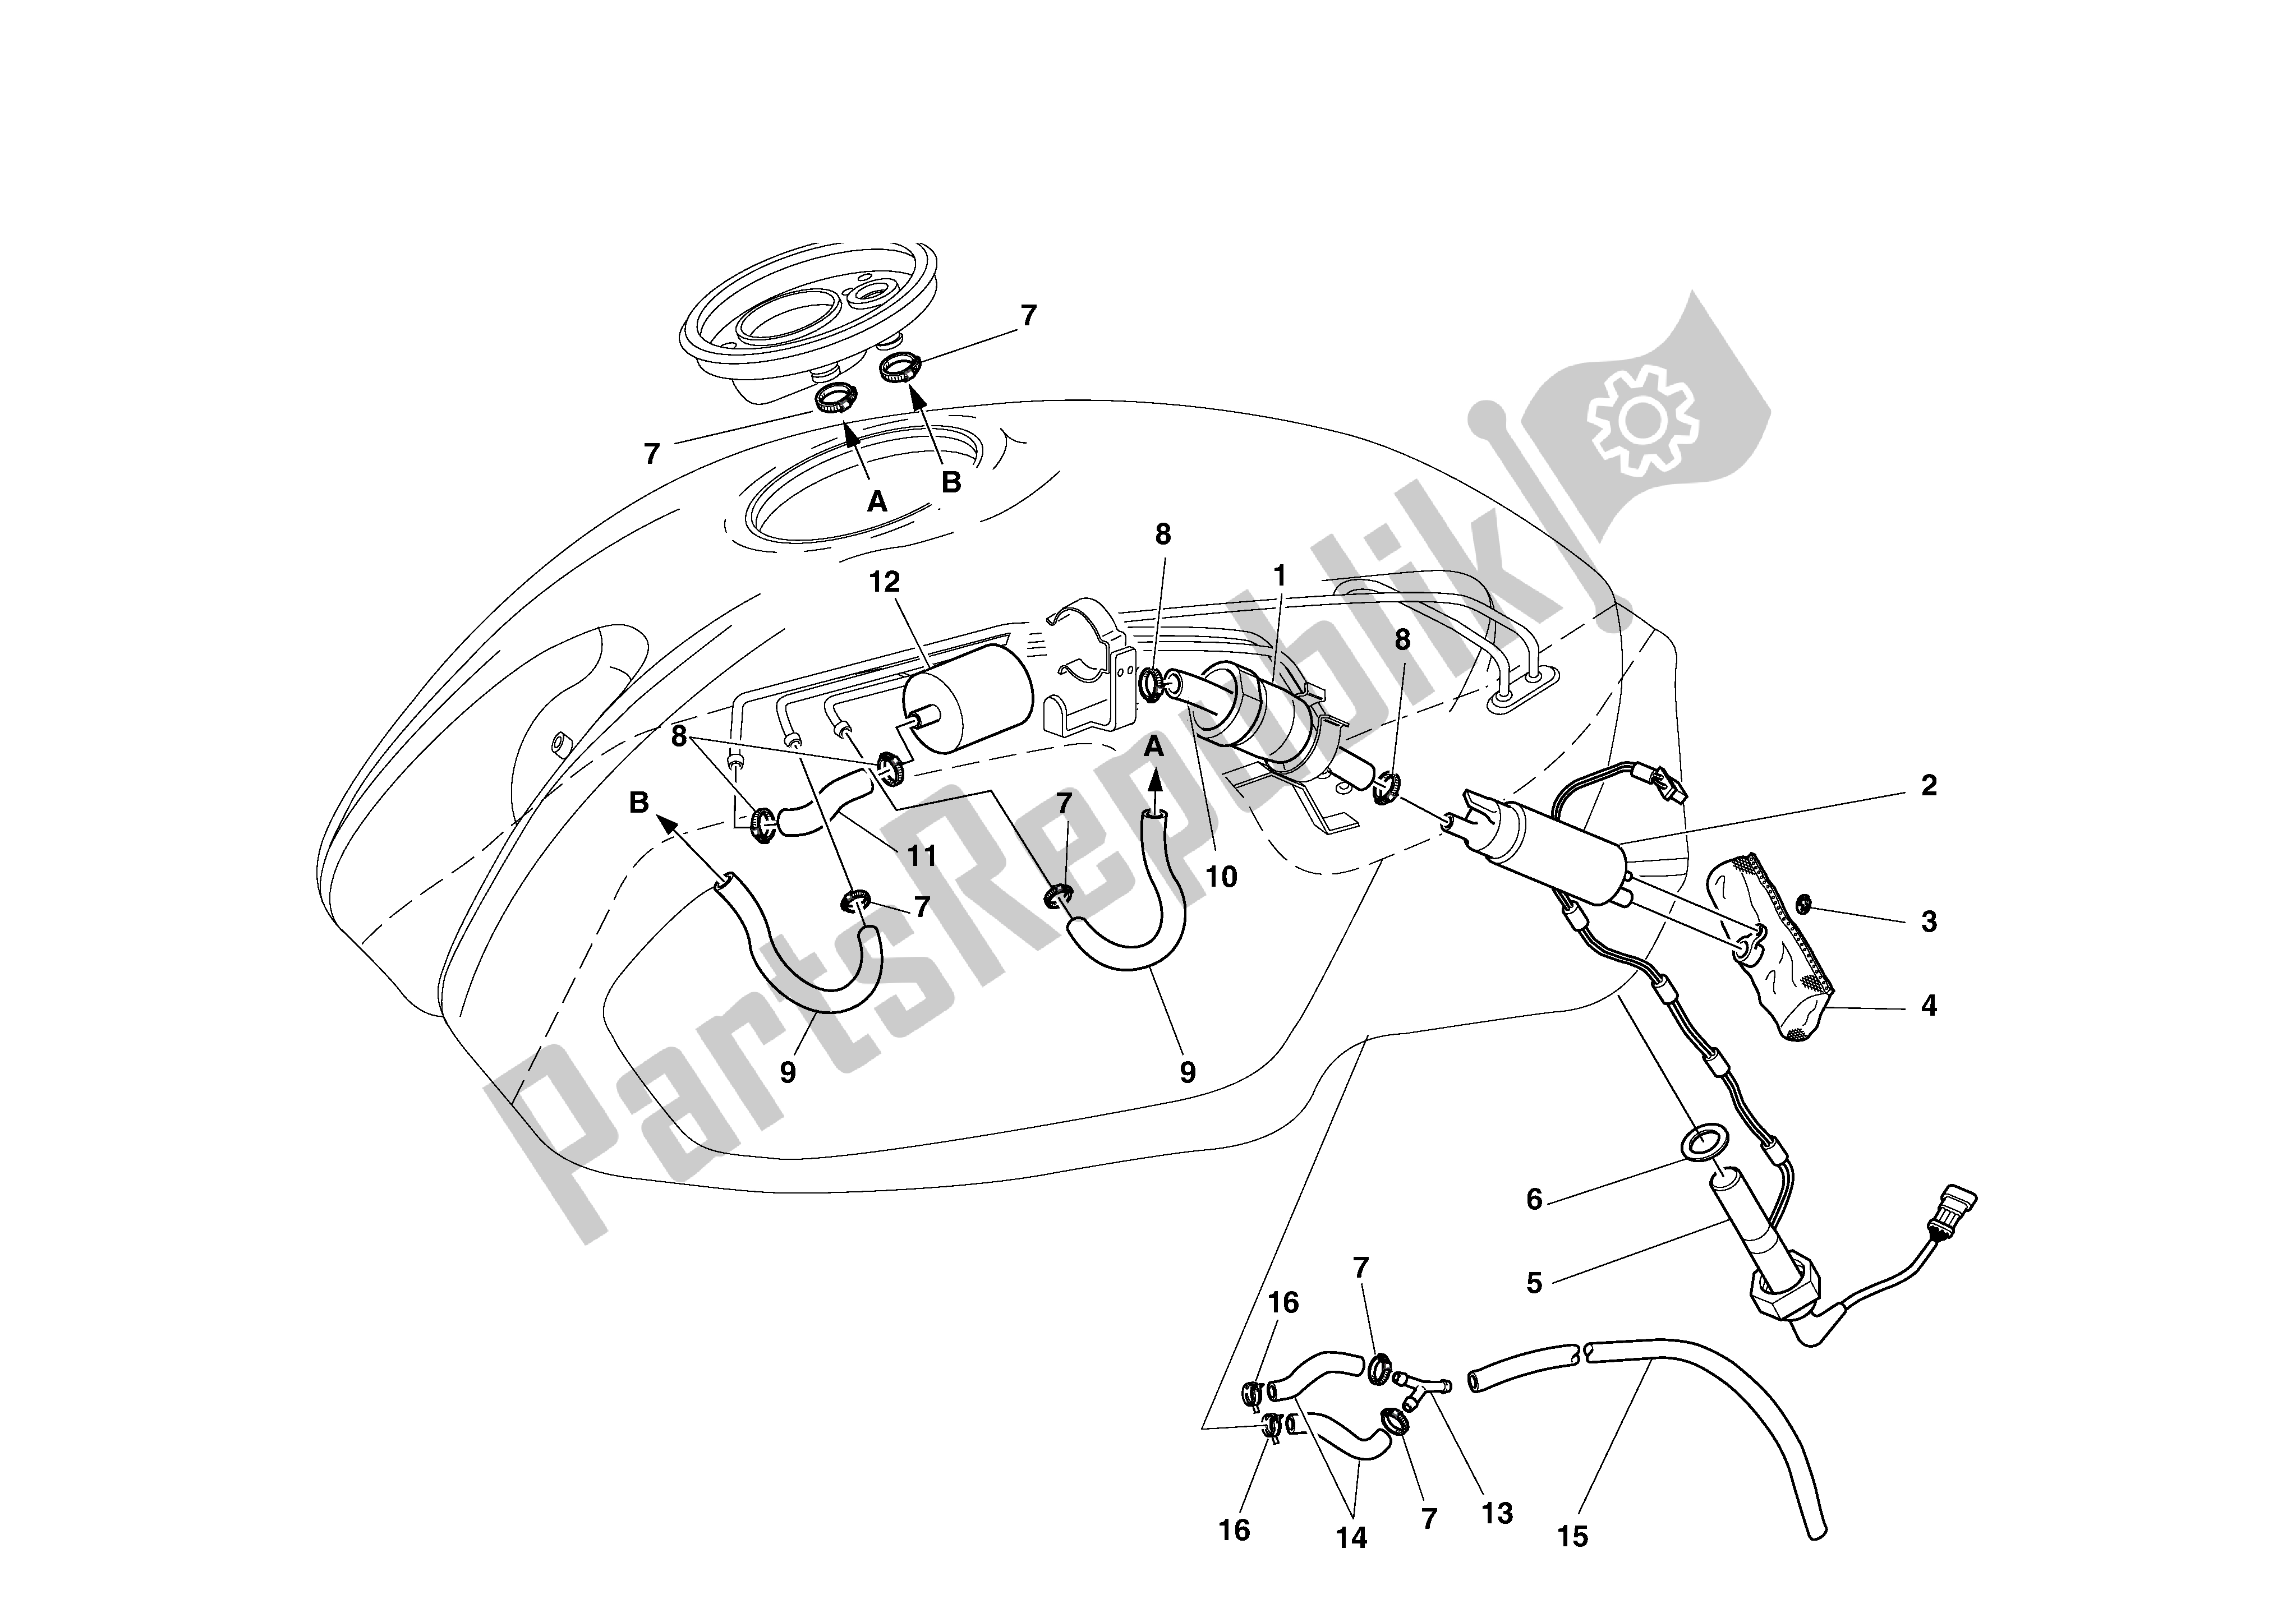 All parts for the Fuel System of the Ducati Monster S4 916 2002